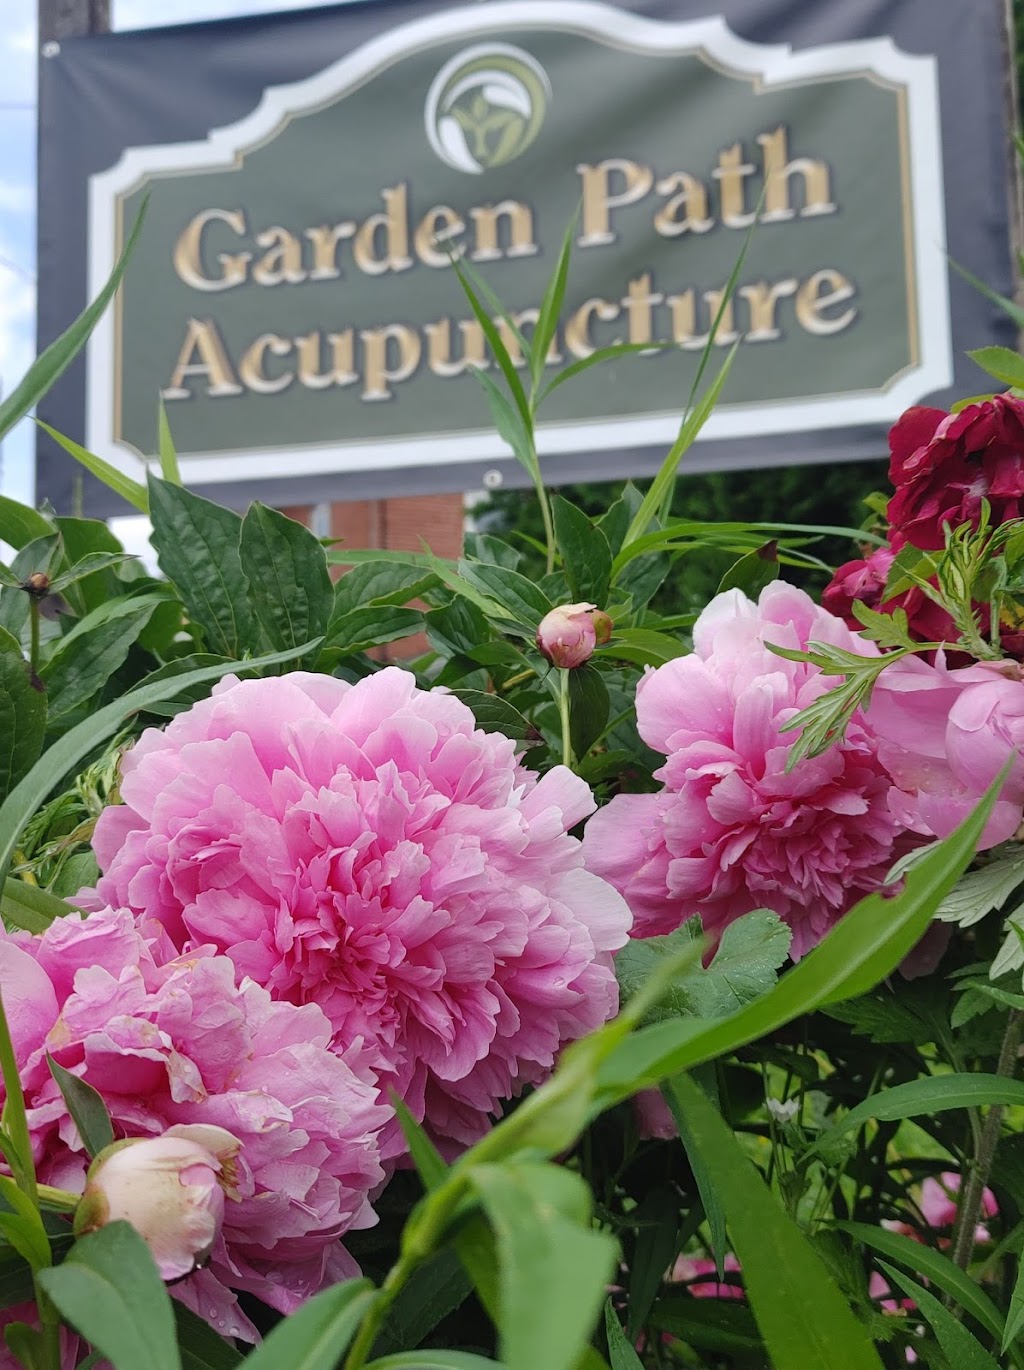 Garden Path Acupuncture | 17 N 2nd St, Souderton, PA 18964 | Phone: (267) 875-3797